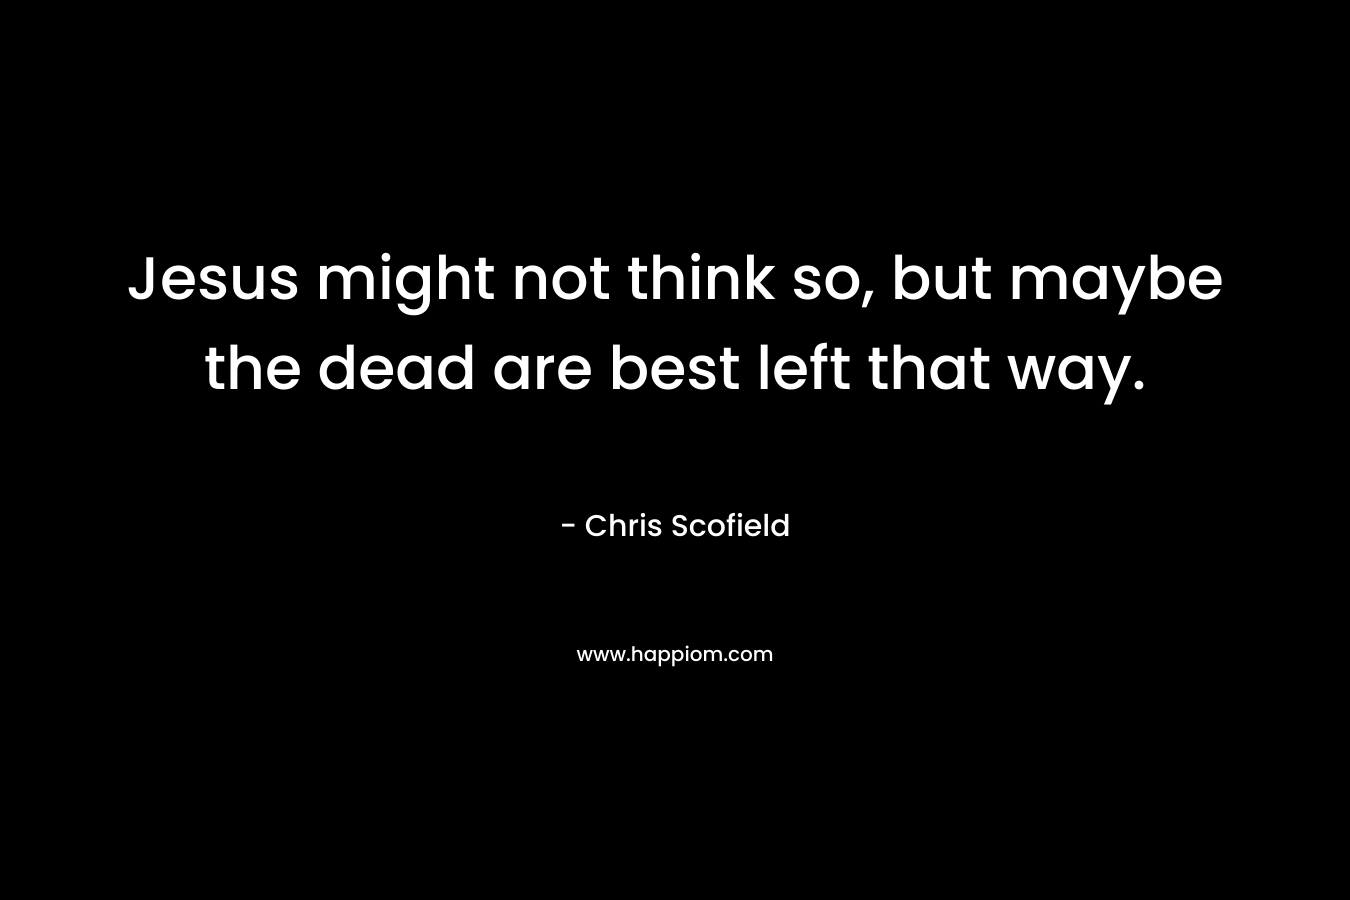 Jesus might not think so, but maybe the dead are best left that way.